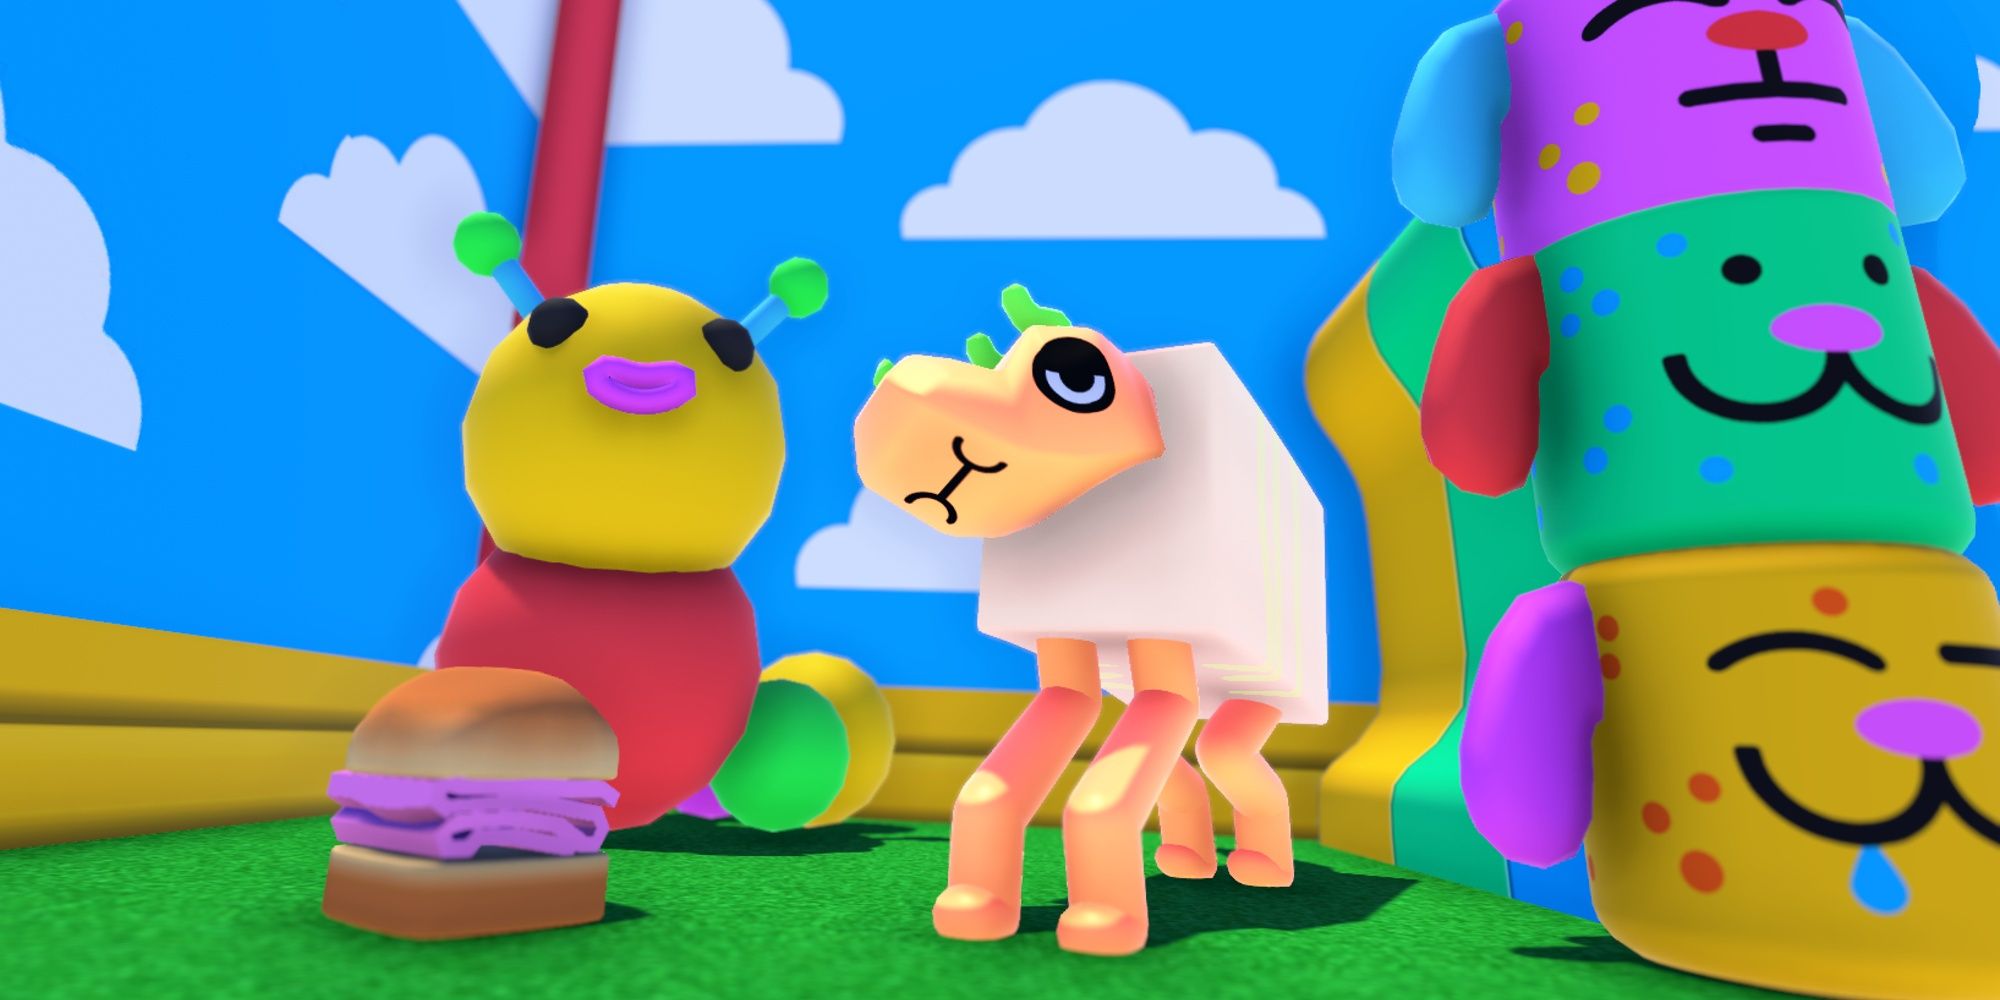 Wobbledogs pet pet character in cartoony environment with totem pole